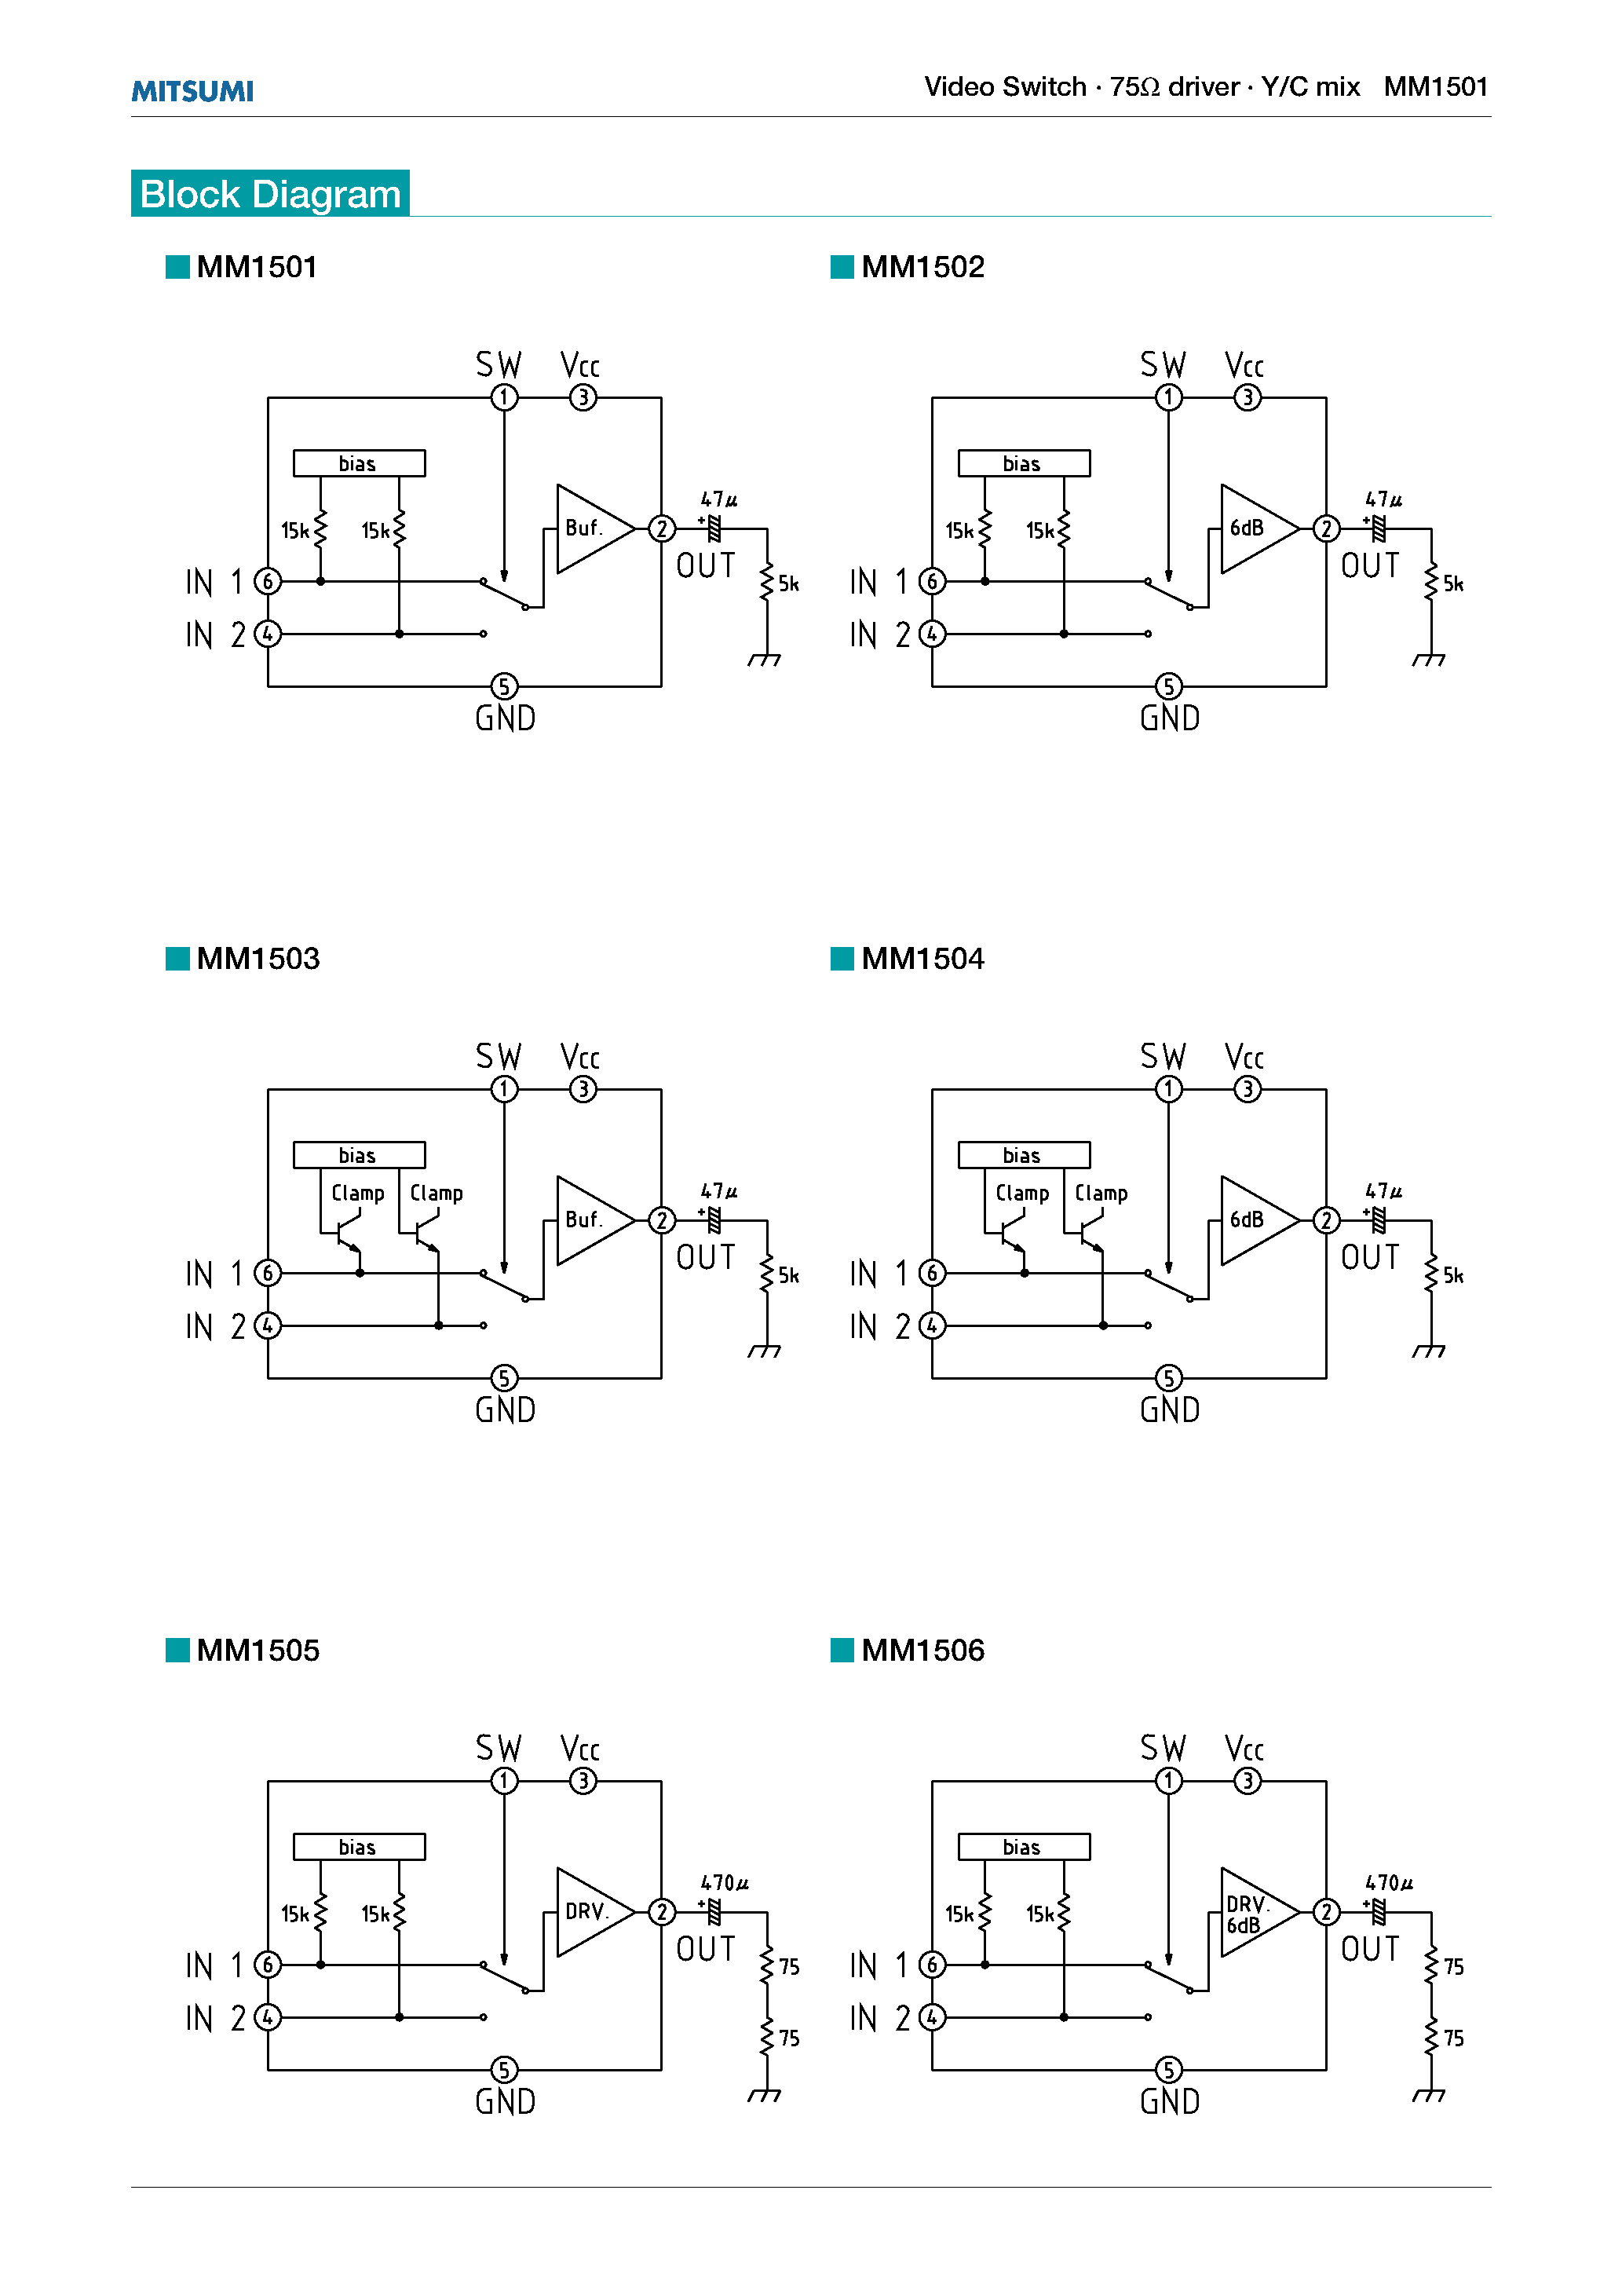 Datasheet MM1501 - Video Switch 75 driver Y/C mix page 2